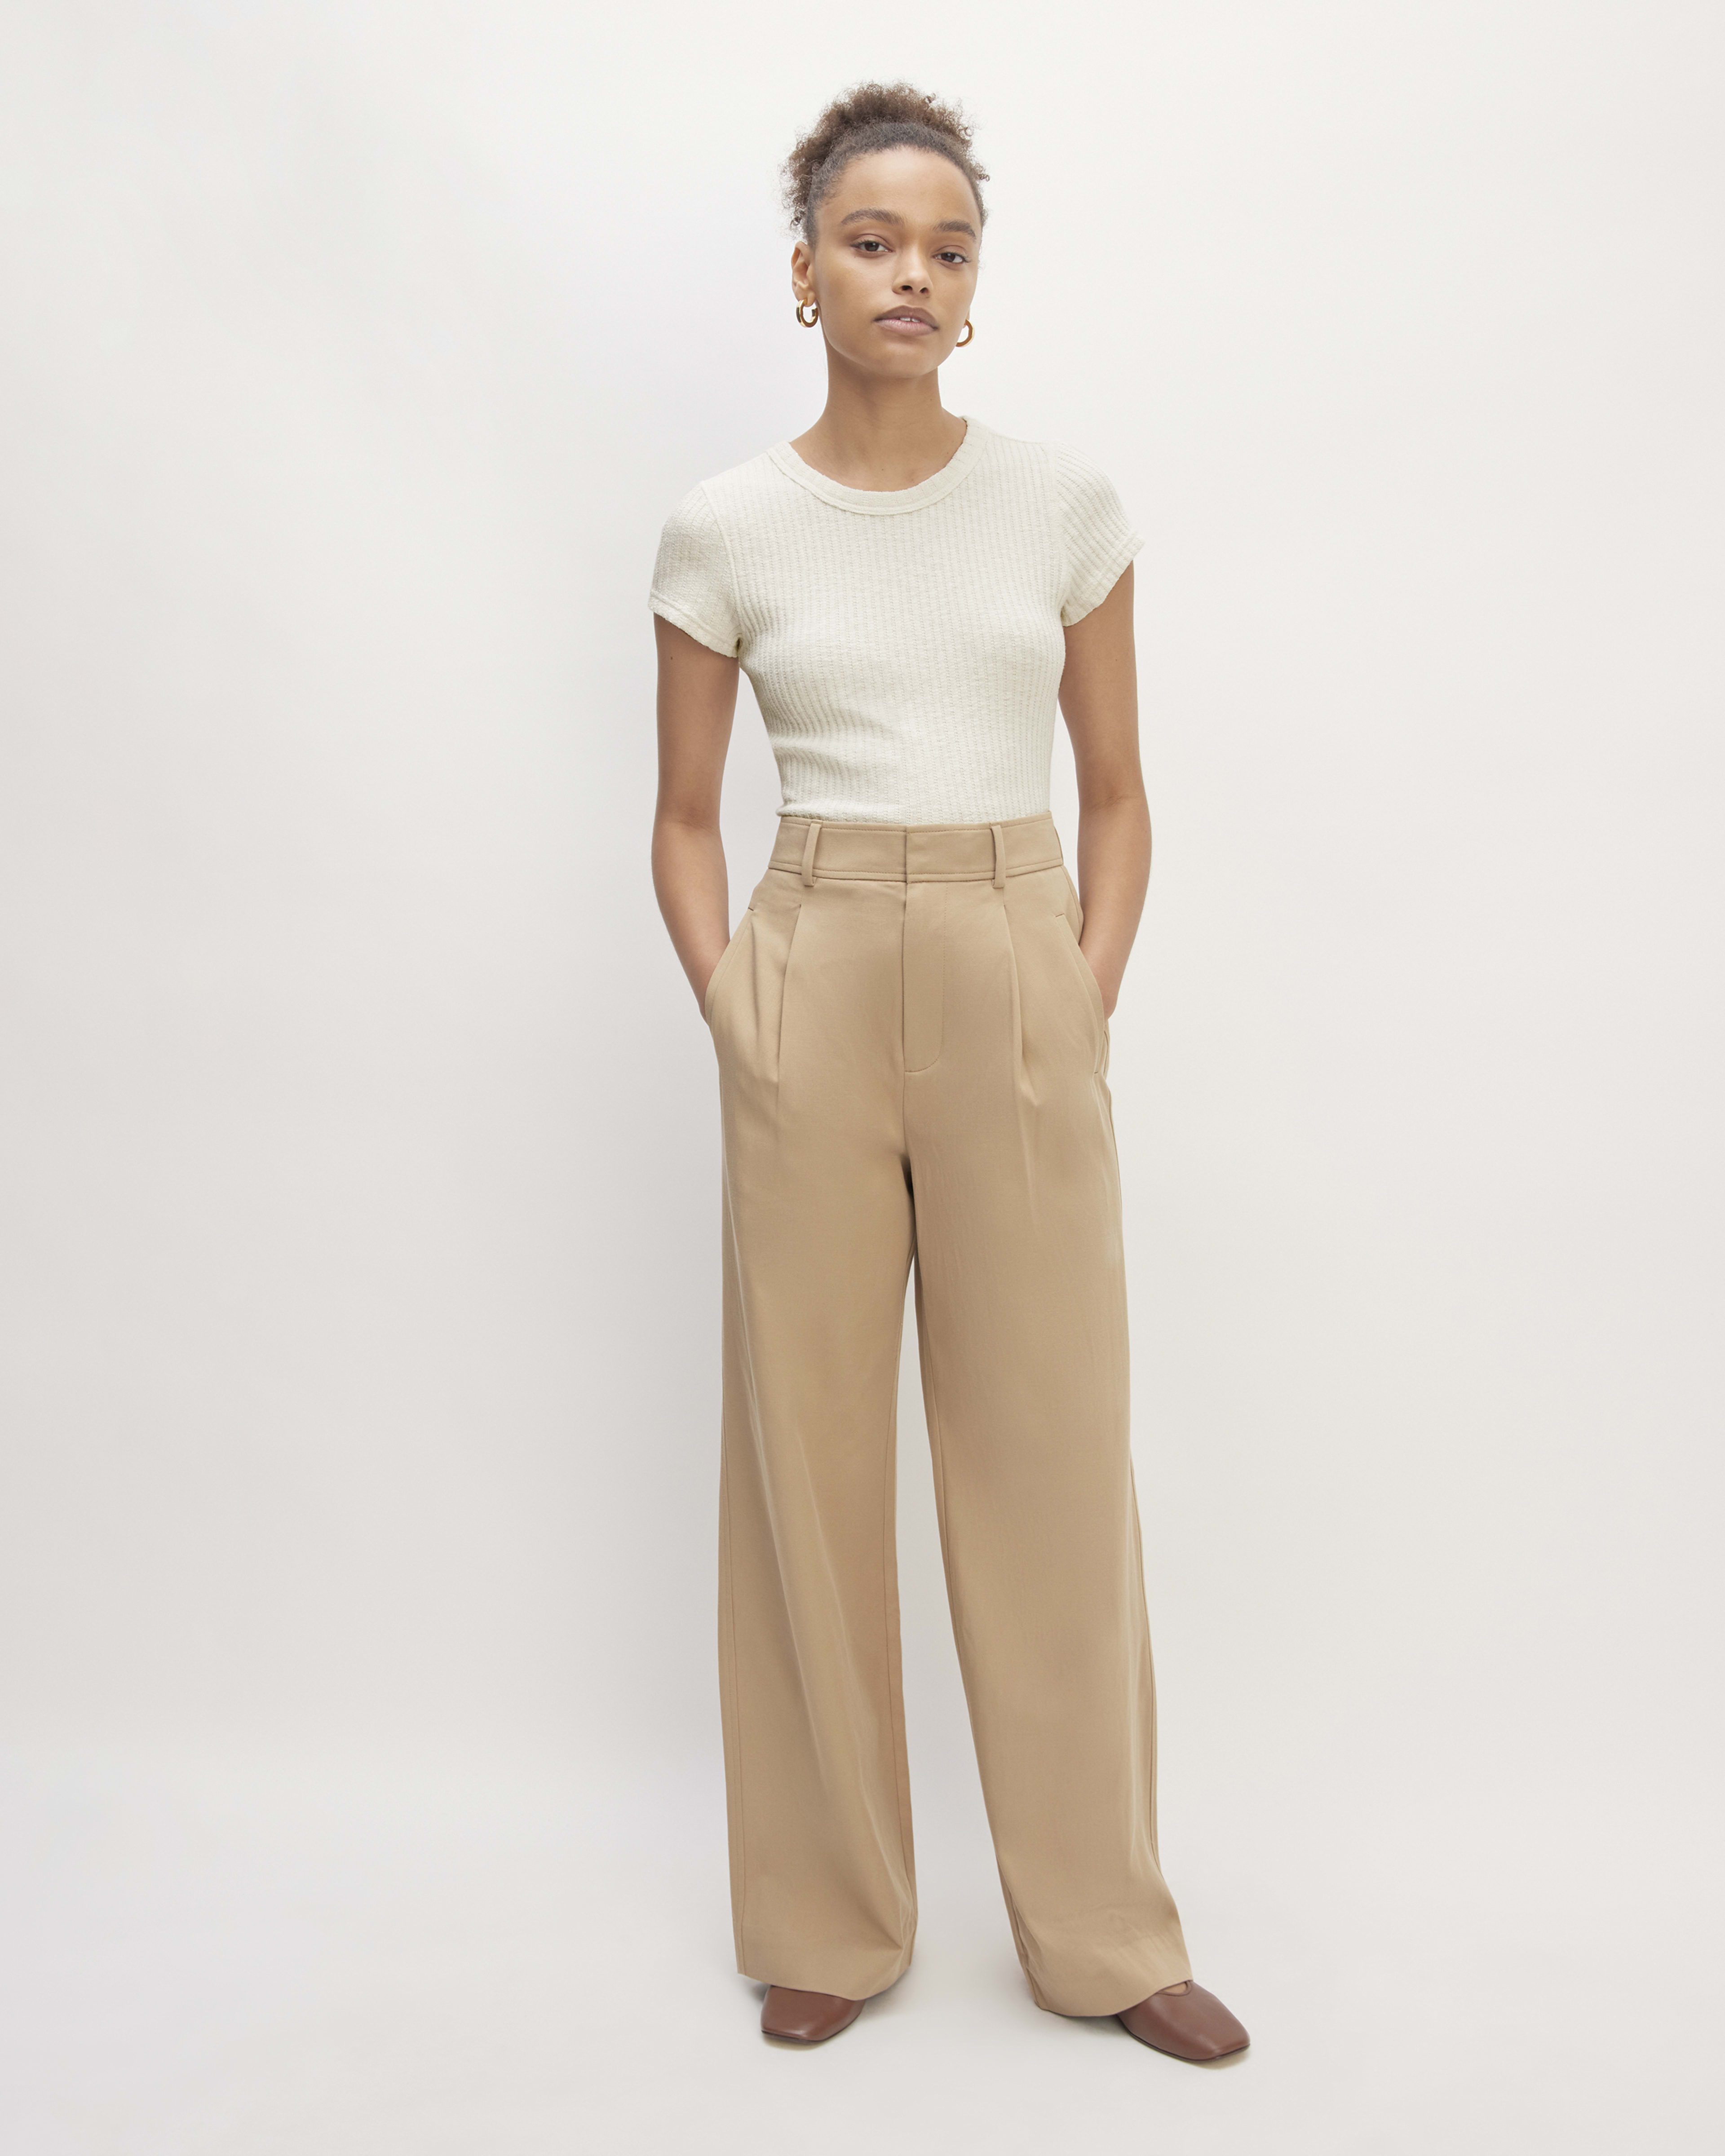 Everlane Just Made Your New Favorite Work Pants (and They're Under